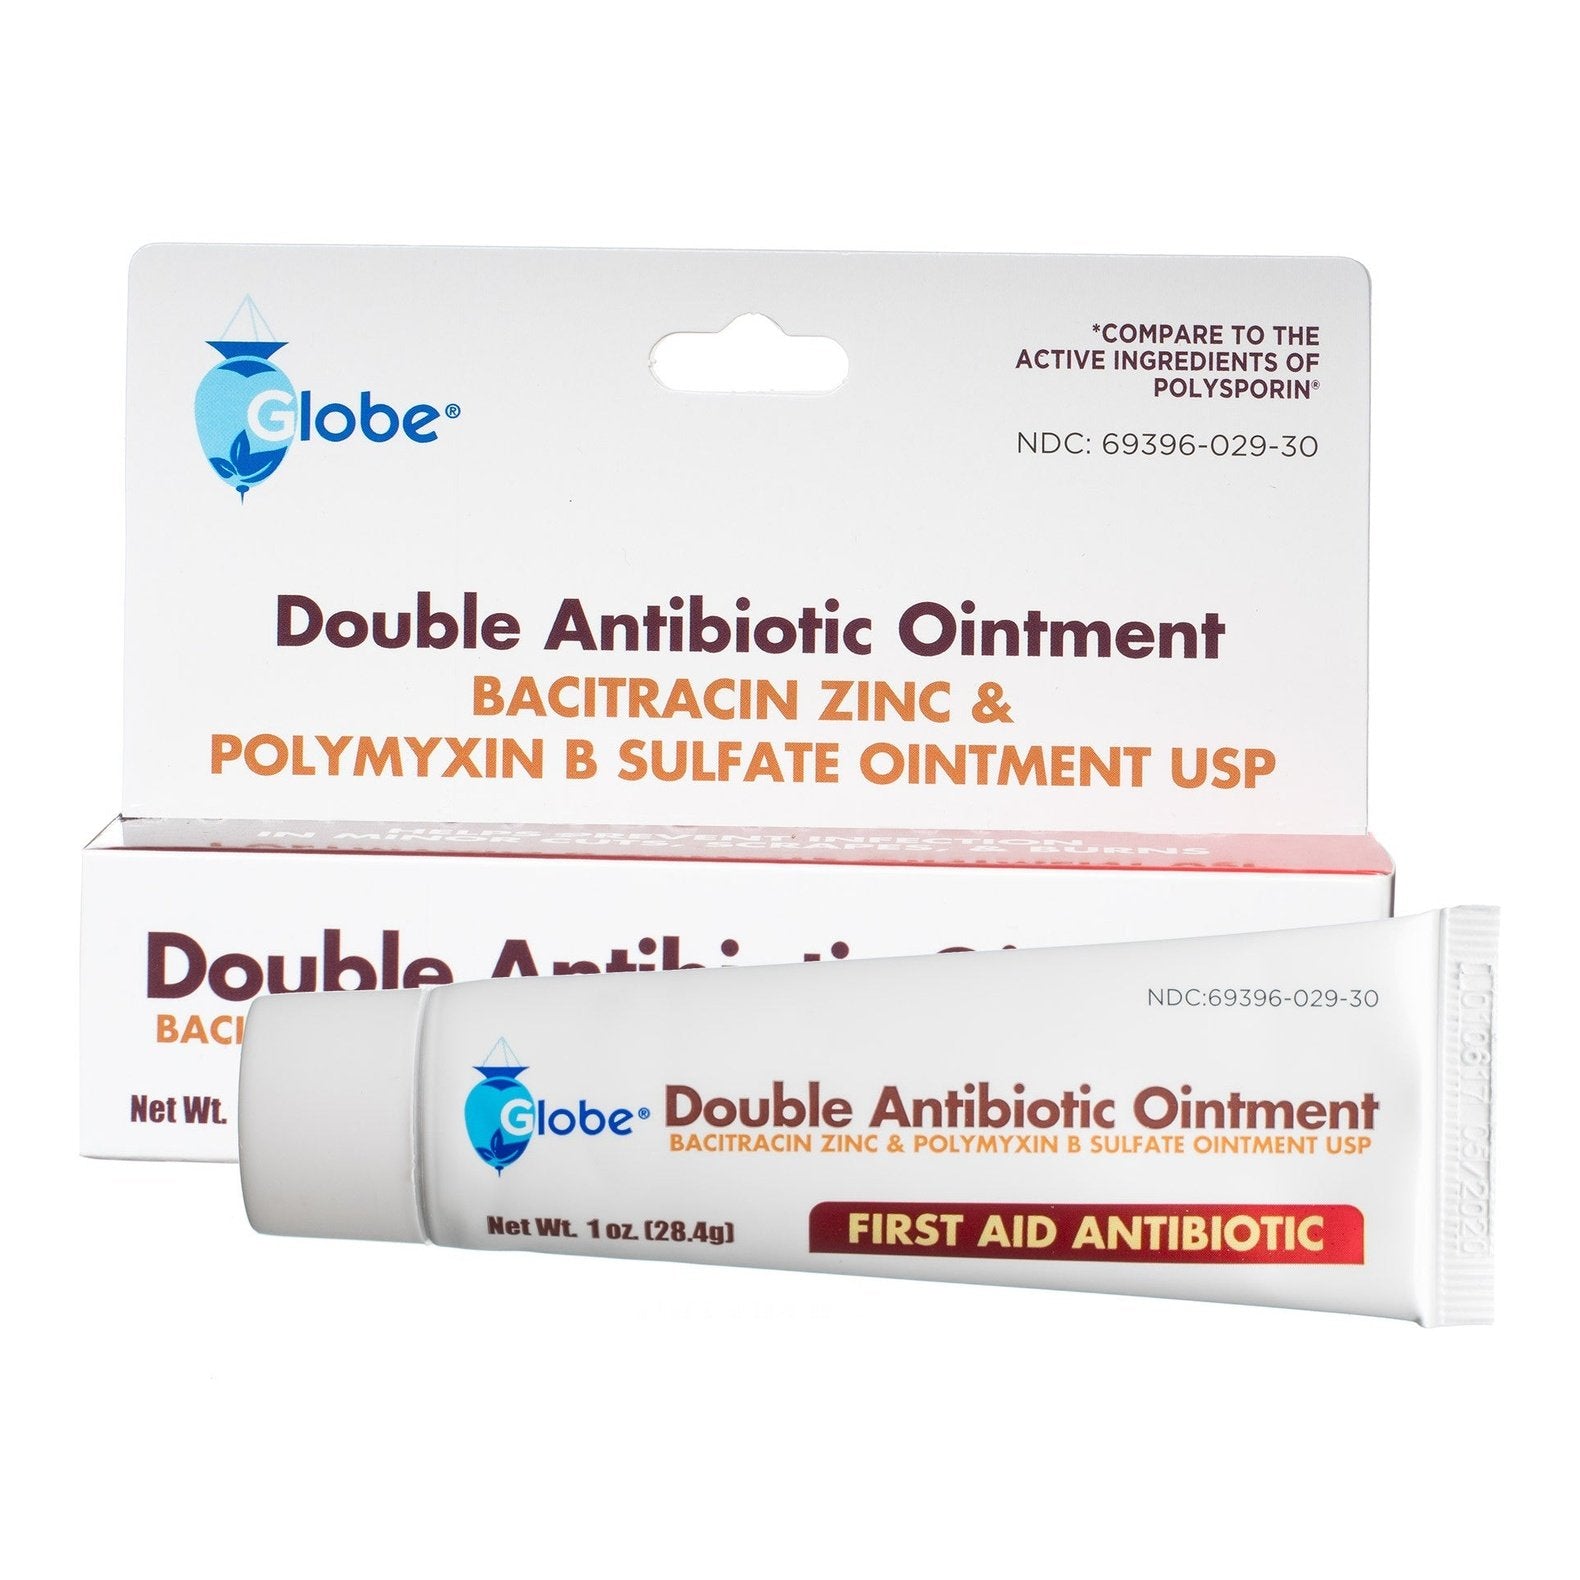 Globe First Aid Topical Double Antibiotic Skin Ointment with Bacitracin Zinc & Polymyxin B Sulfate, for Infection Protection & Wound Care, Neomycin-Free, Travel Size